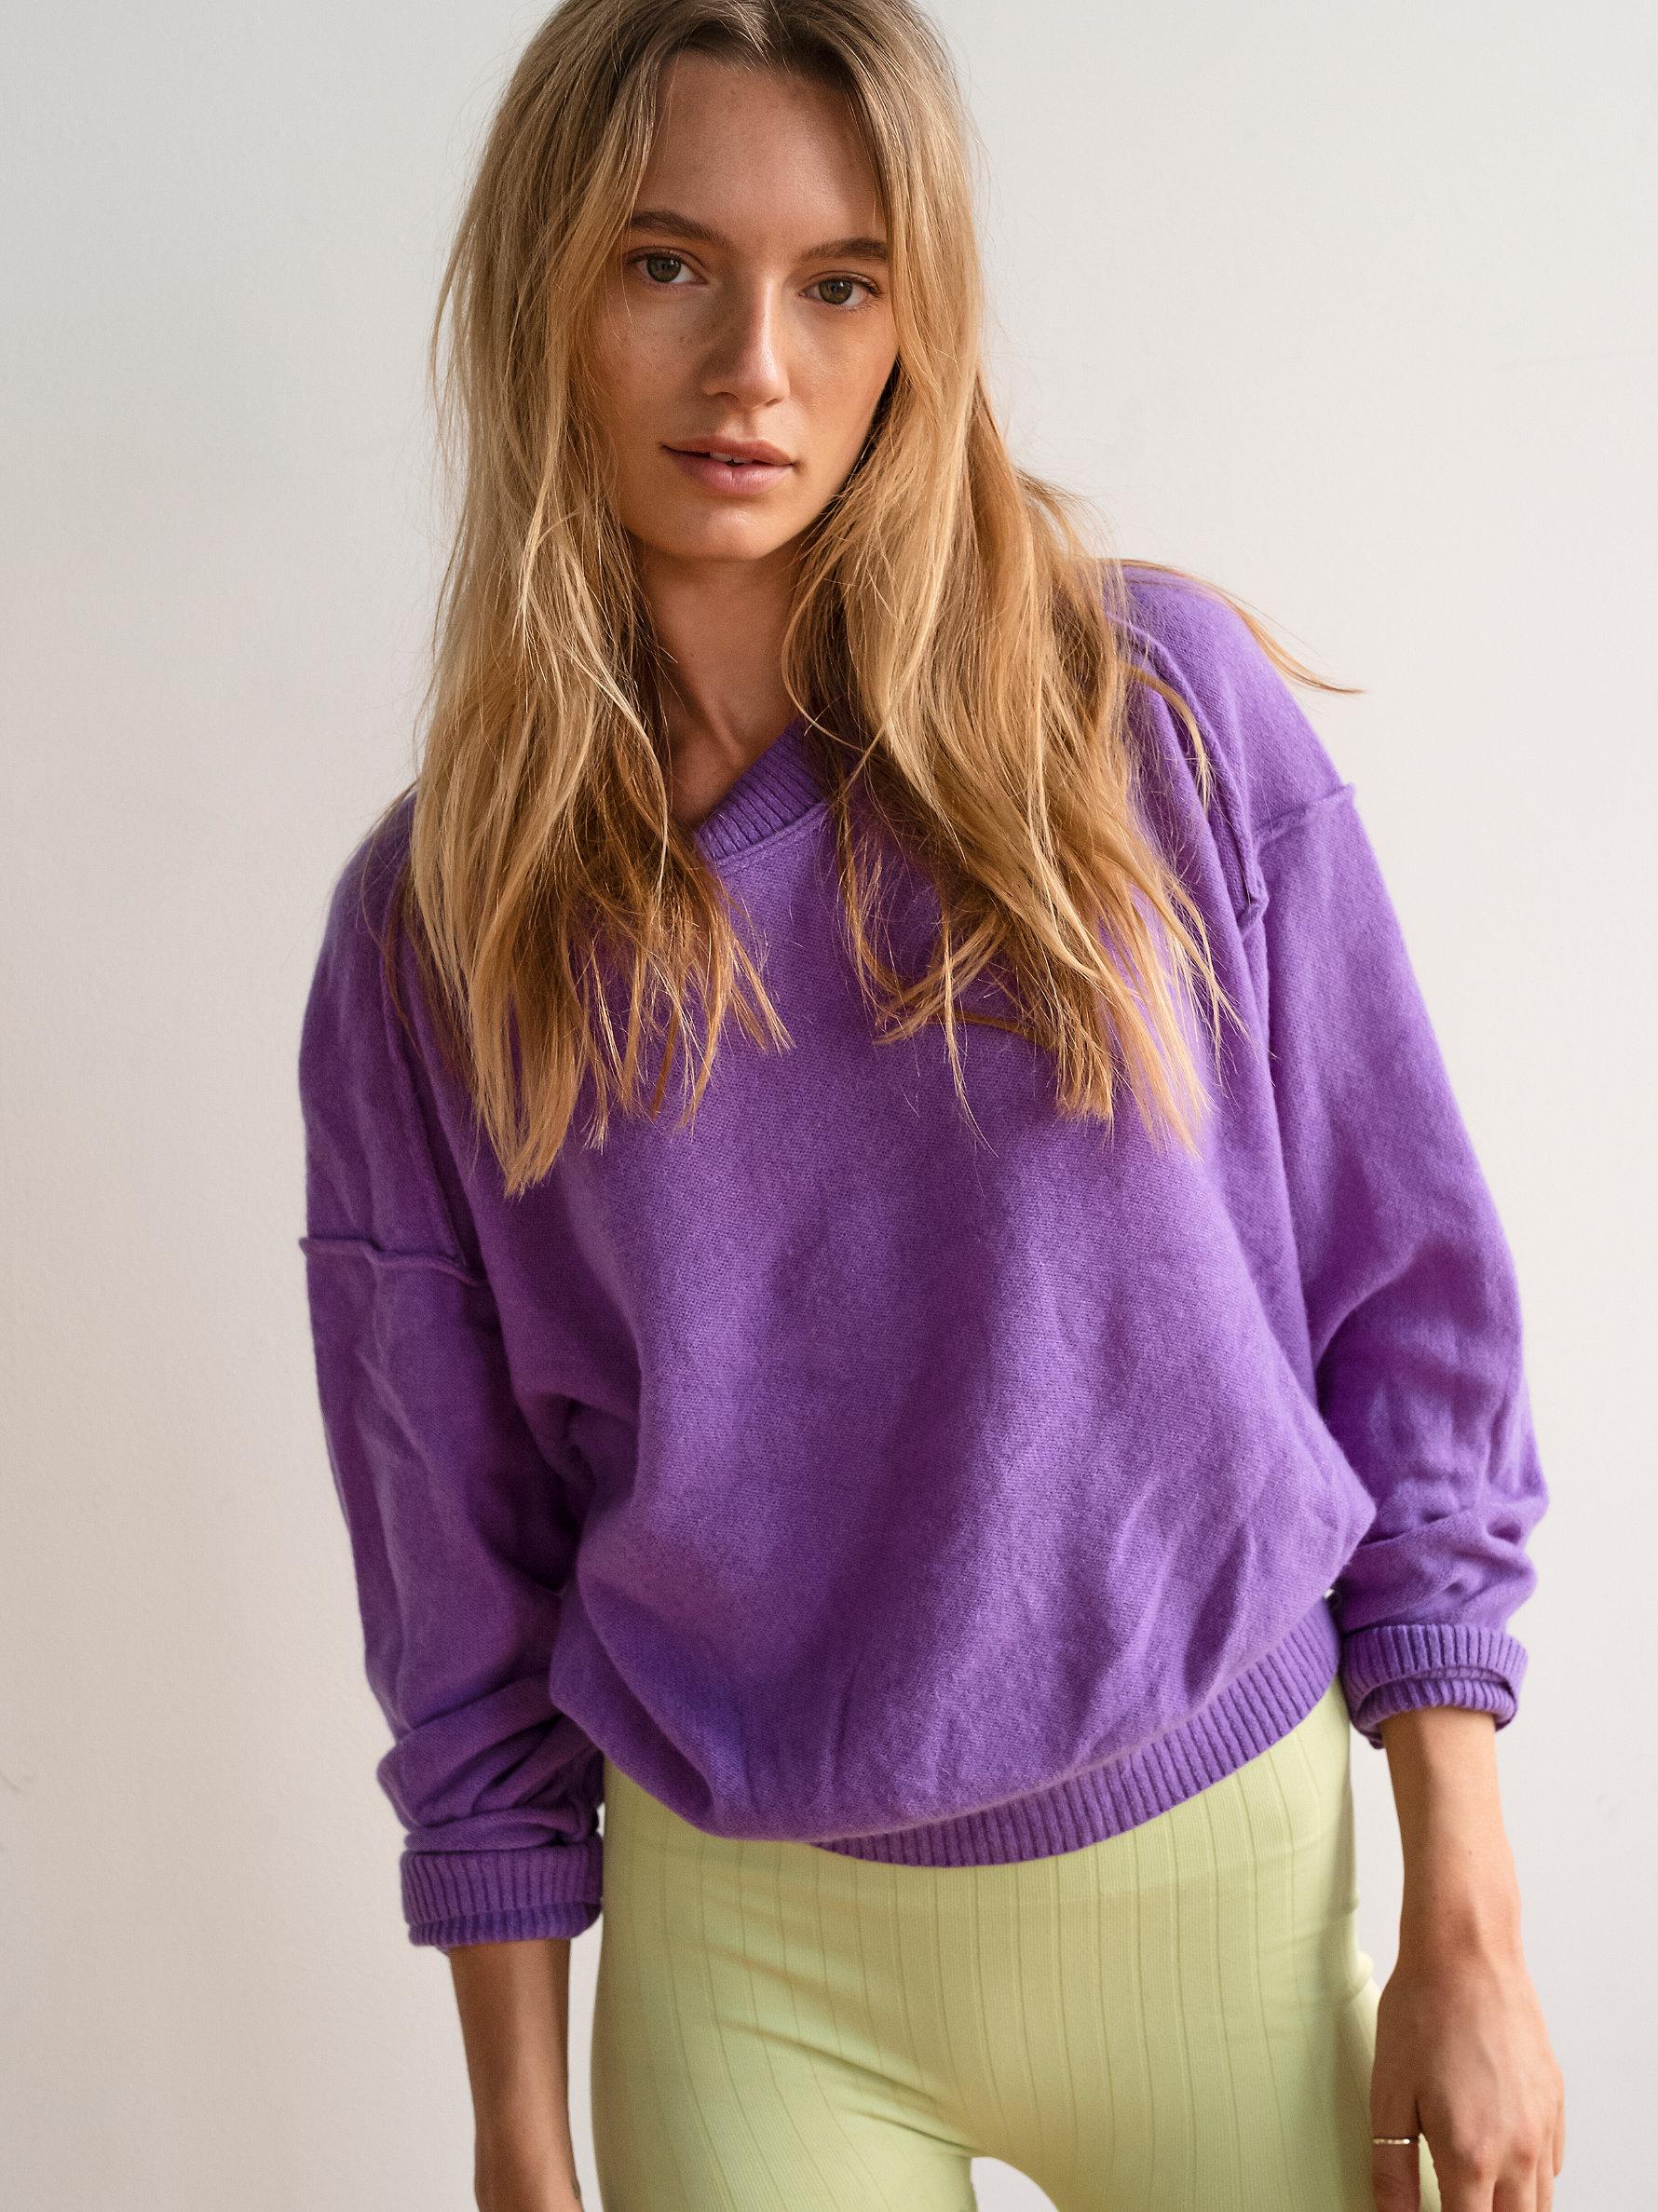 Free People Kora Cashmere Crew Sweater In Electric Lavender Purple Lyst